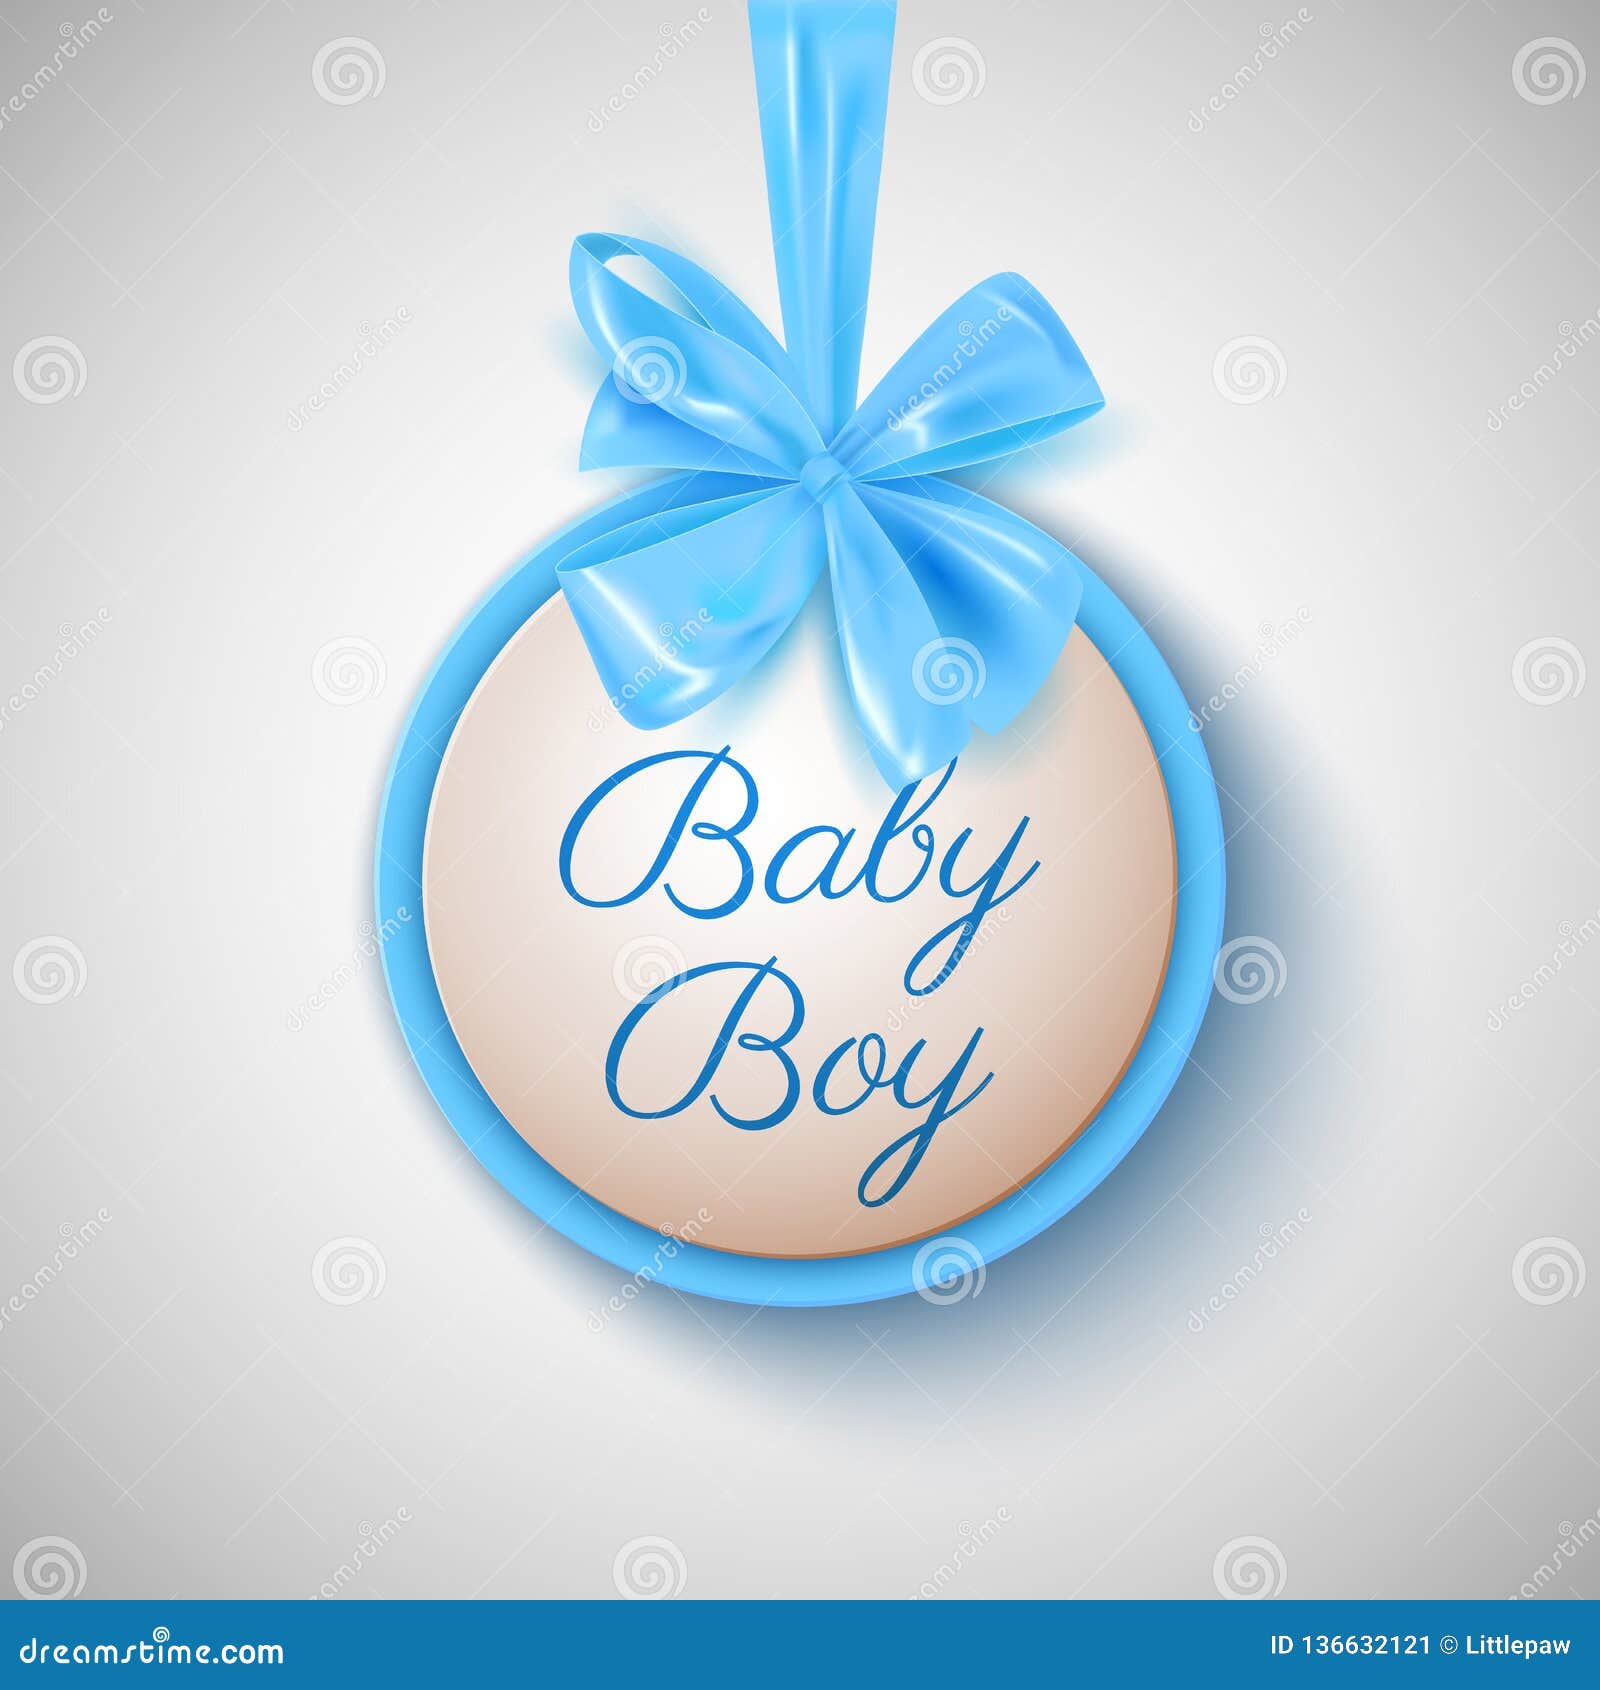 Baby Boy Shower Cute Blue Bow And Round Banner, Vector ...